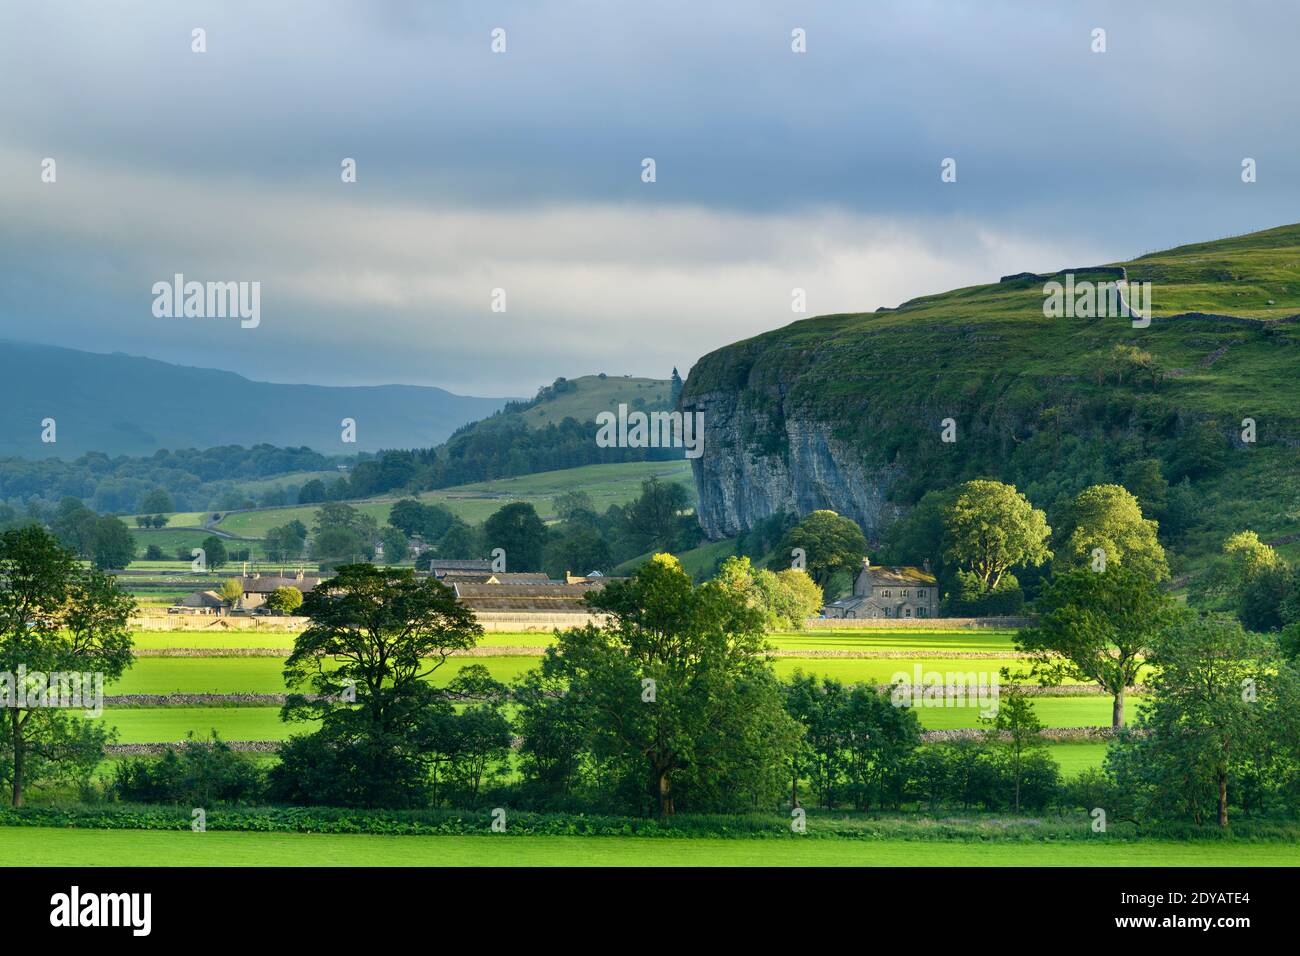 Scenic Wharfe Valley (flat sunlit fields, stone walls, Kilnsey Crag - high limestone cliff, rolling hills) - Wharfedale, Yorkshire Dales, England, UK. Stock Photo